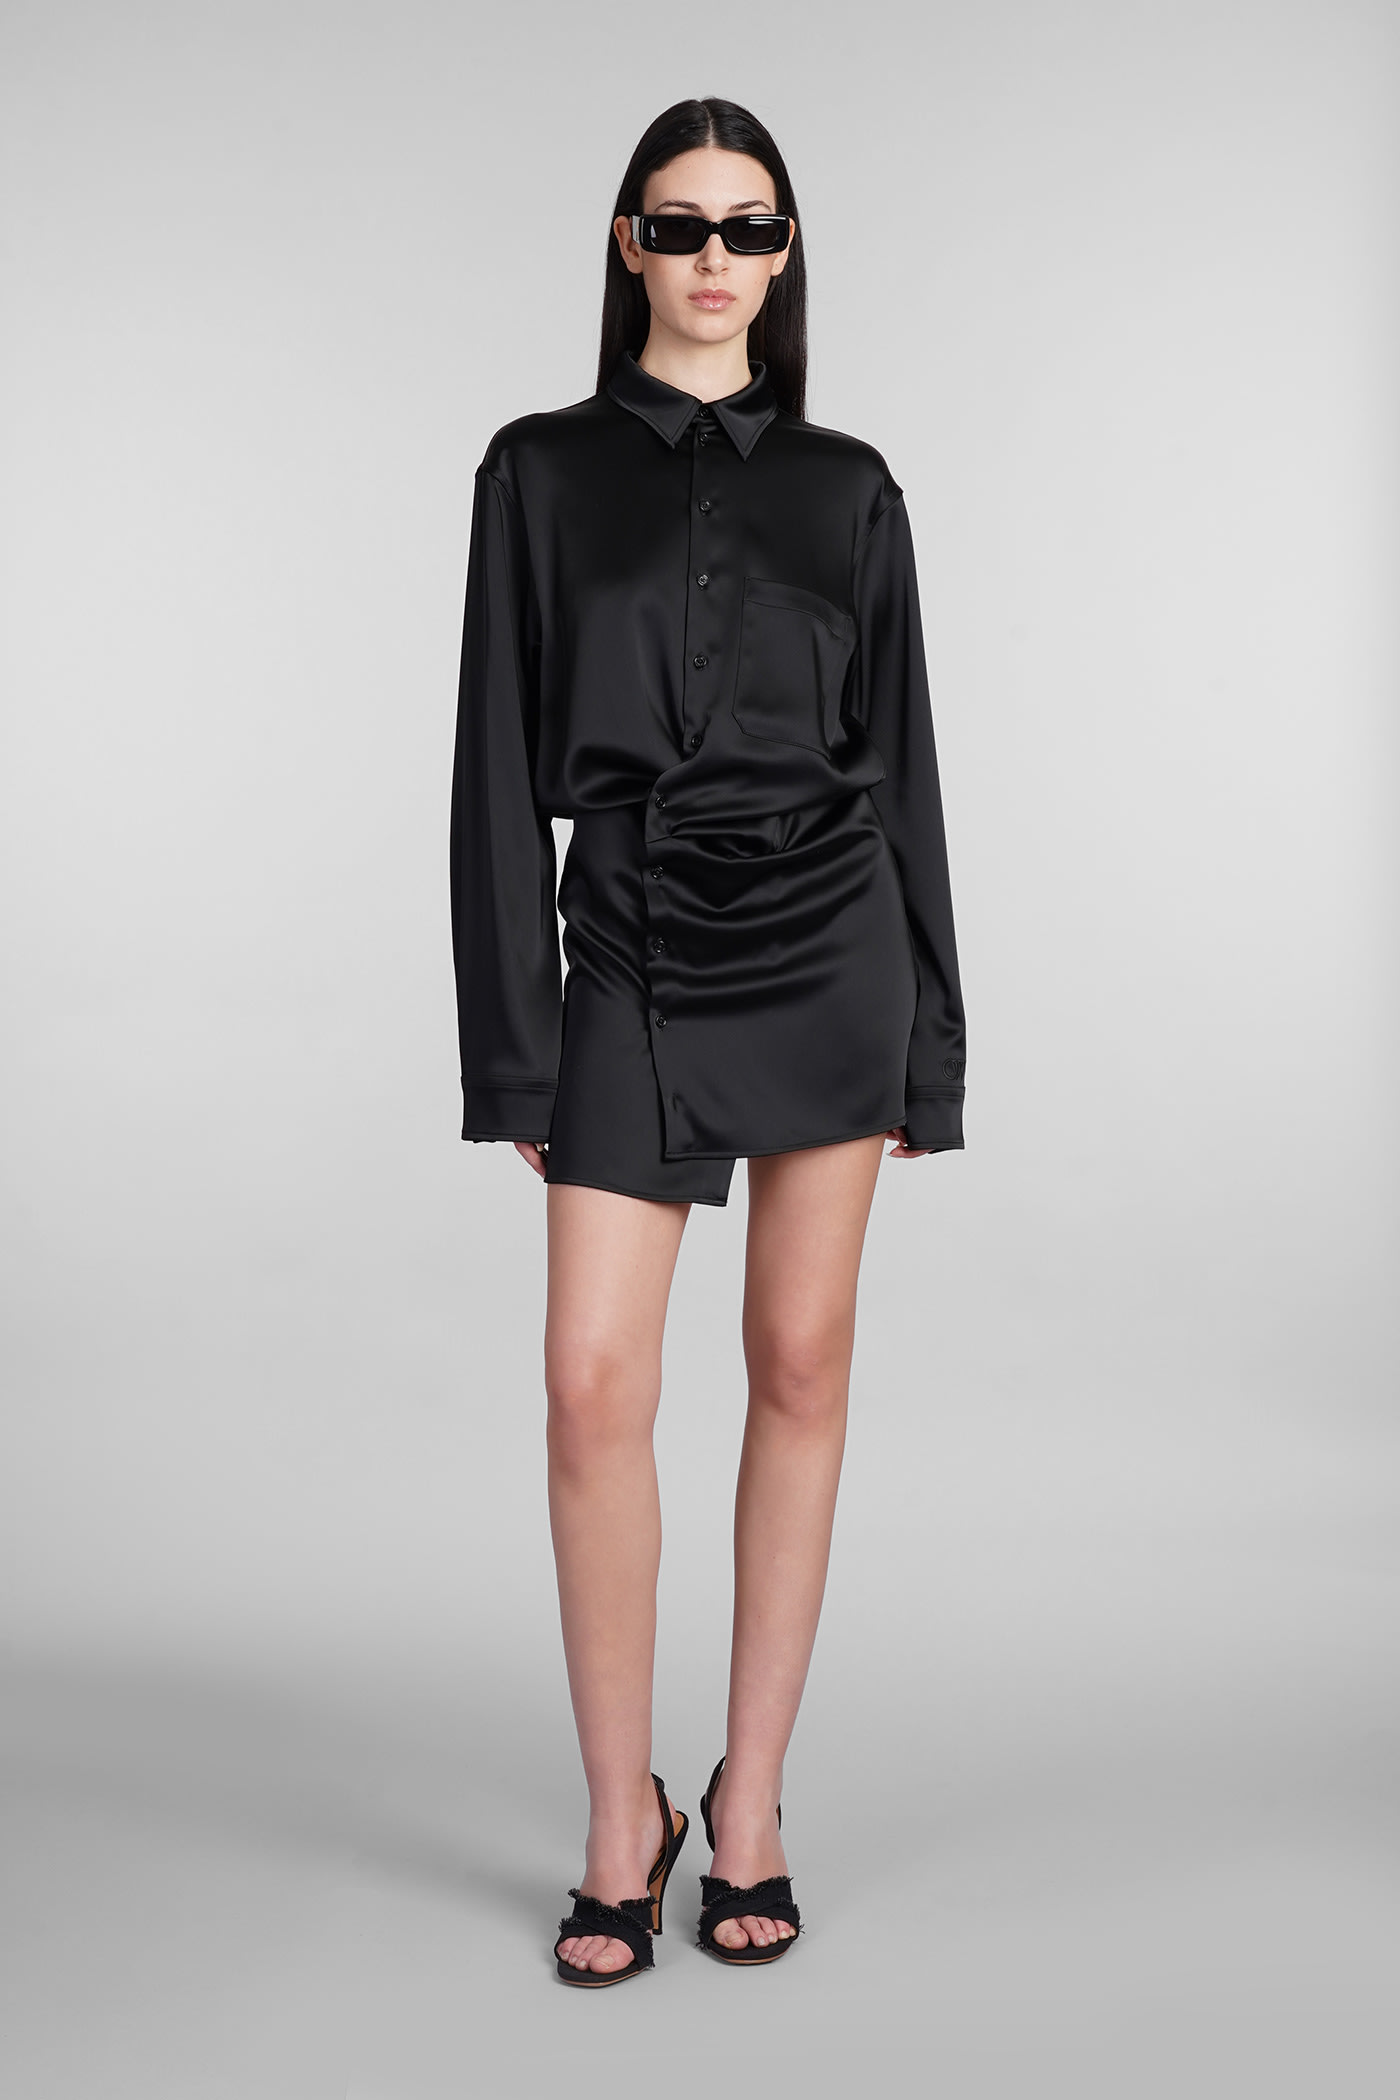 Off-white Dress In Black Acrylic